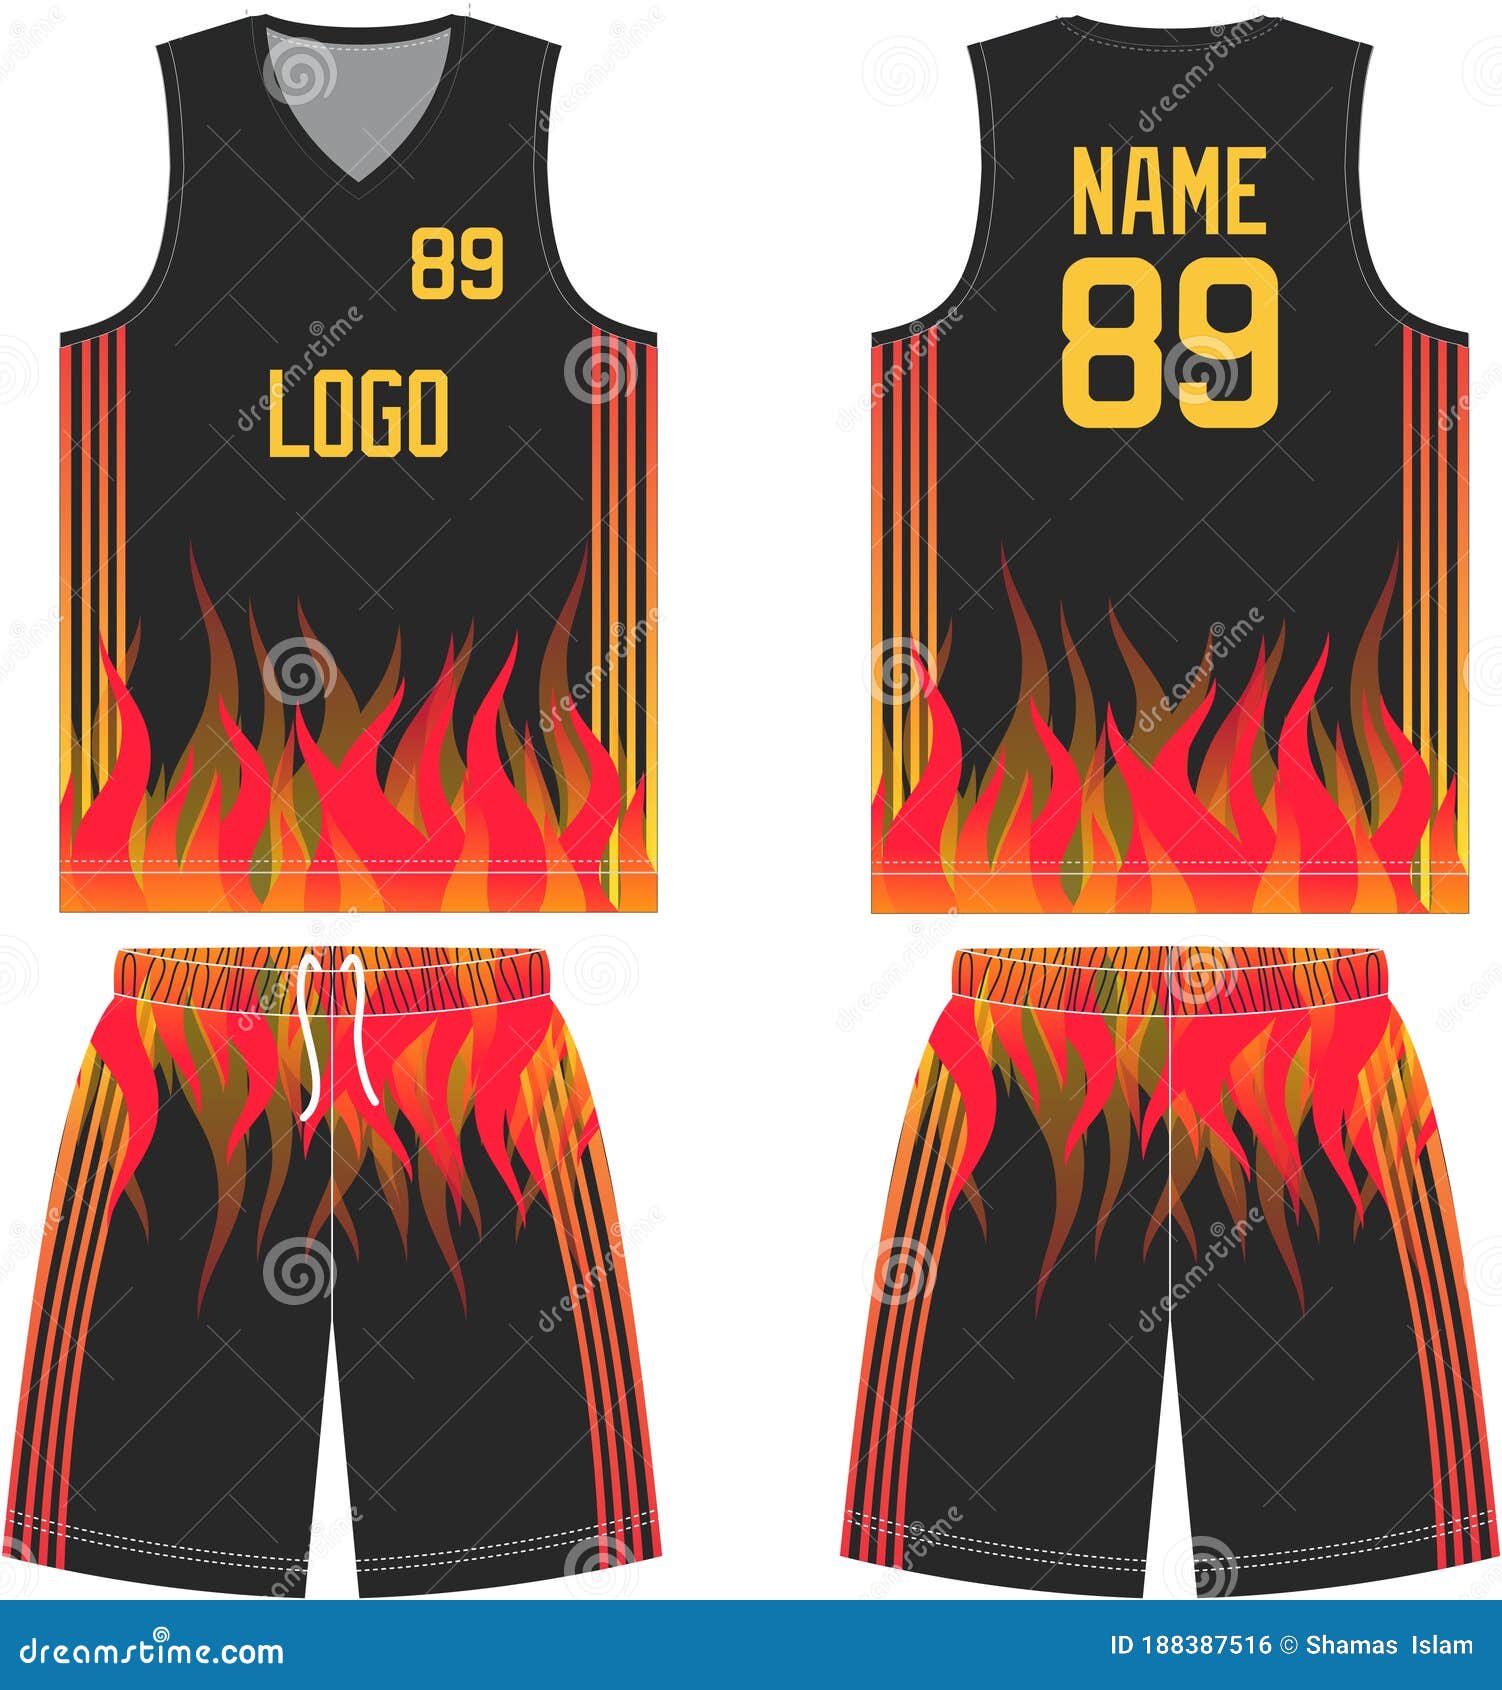 nba jersey design back and front